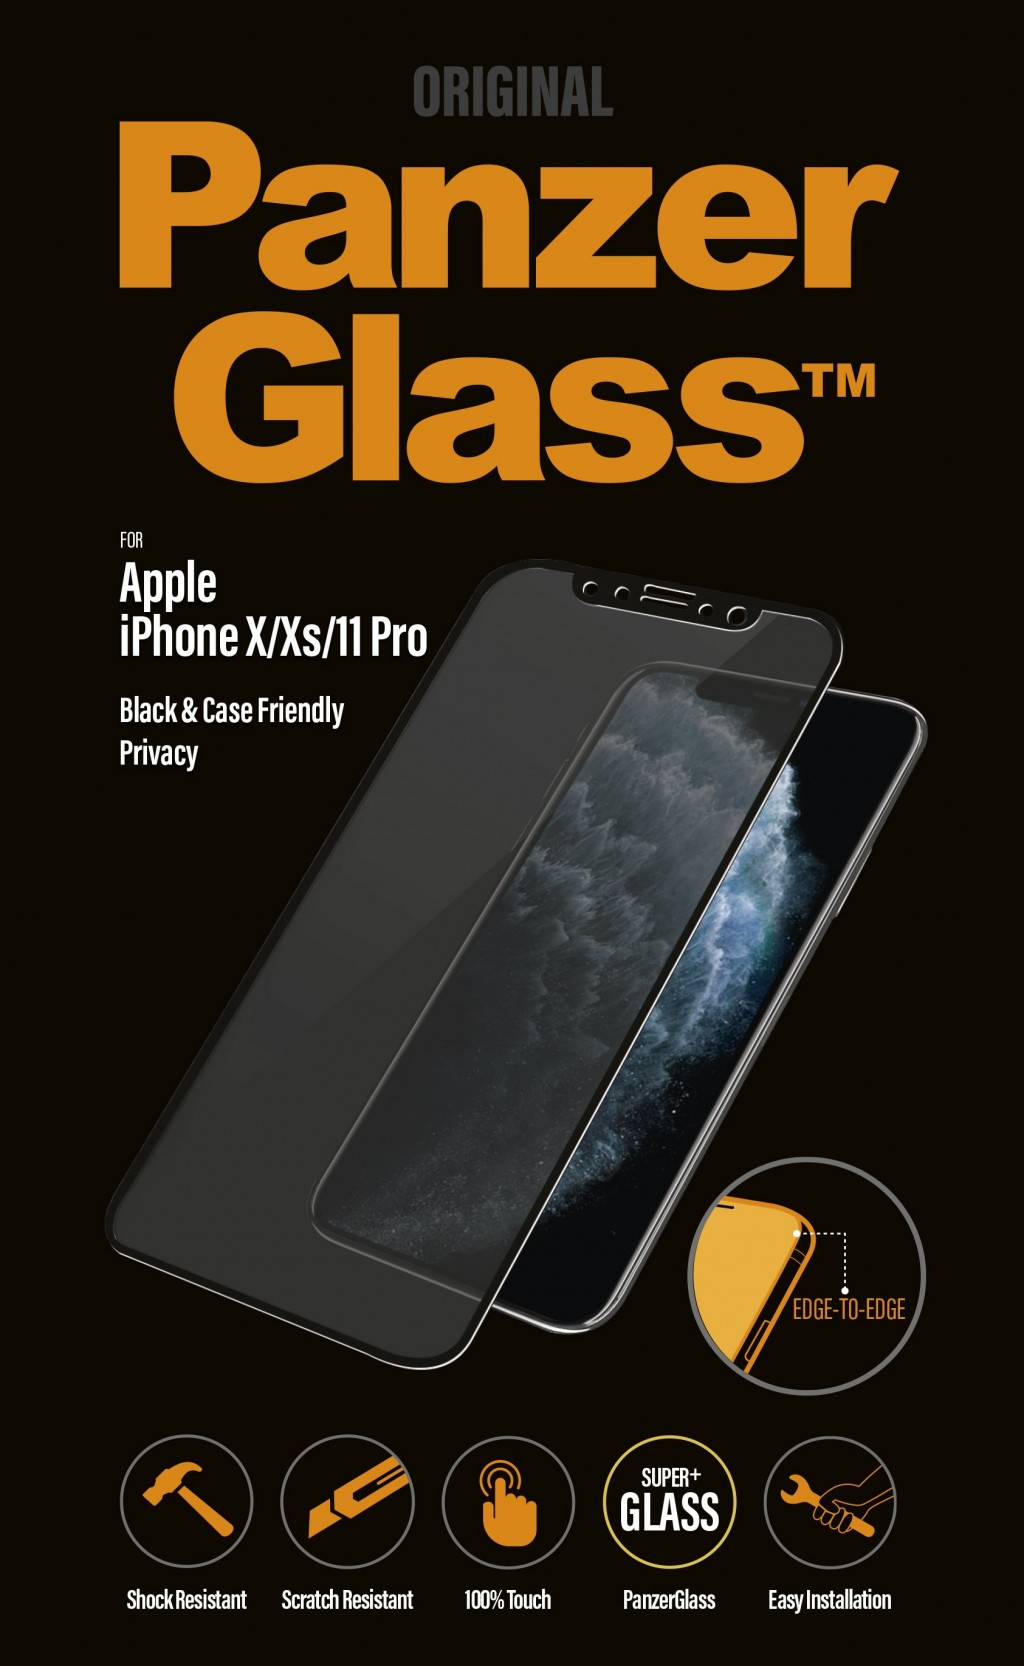 PanzerGlass | P2666 | Screen protector | Apple | iPhone X/Xs/11 Pro | Tempered glass | Black | Confidentiality filter; Full frame coverage; Anti-shatter film (holds the glass together and protects against glass shards in case of breakage); Case Friendly – compatible with all Cases; Anti-glare coating (reduces light reflection); Blue light reduction